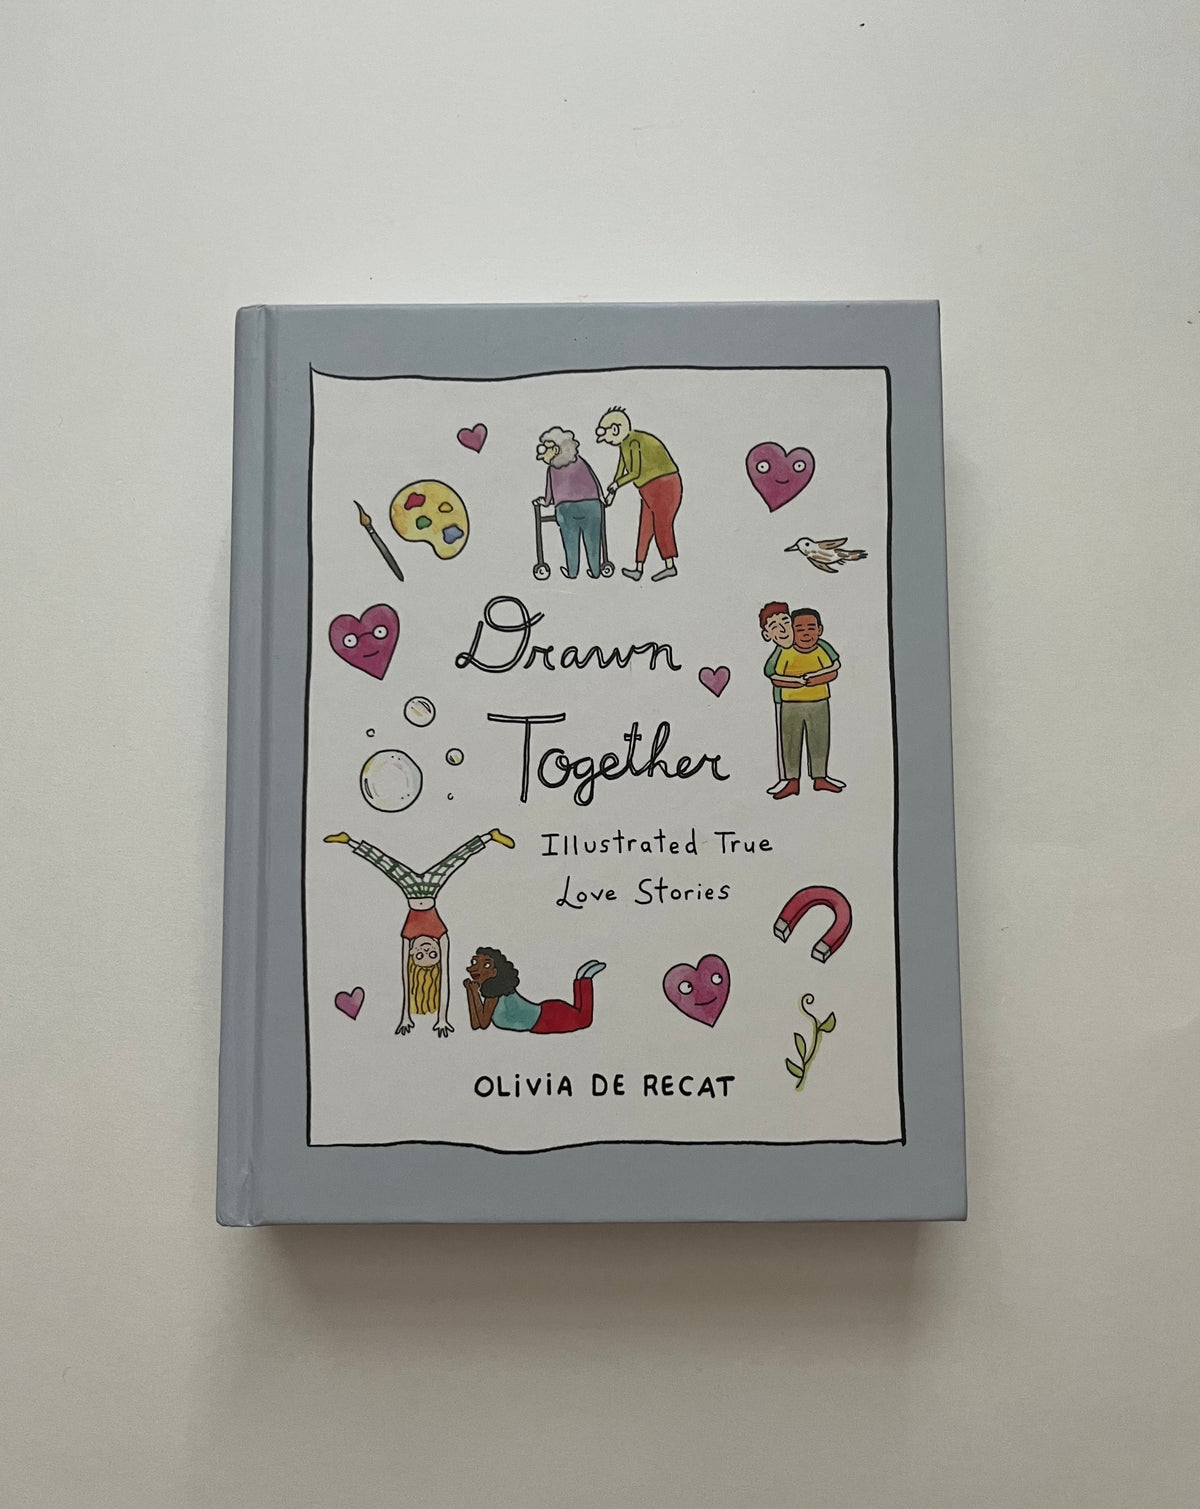 Drawn Together: Illustrated True Love Stories by Olivia De Recat